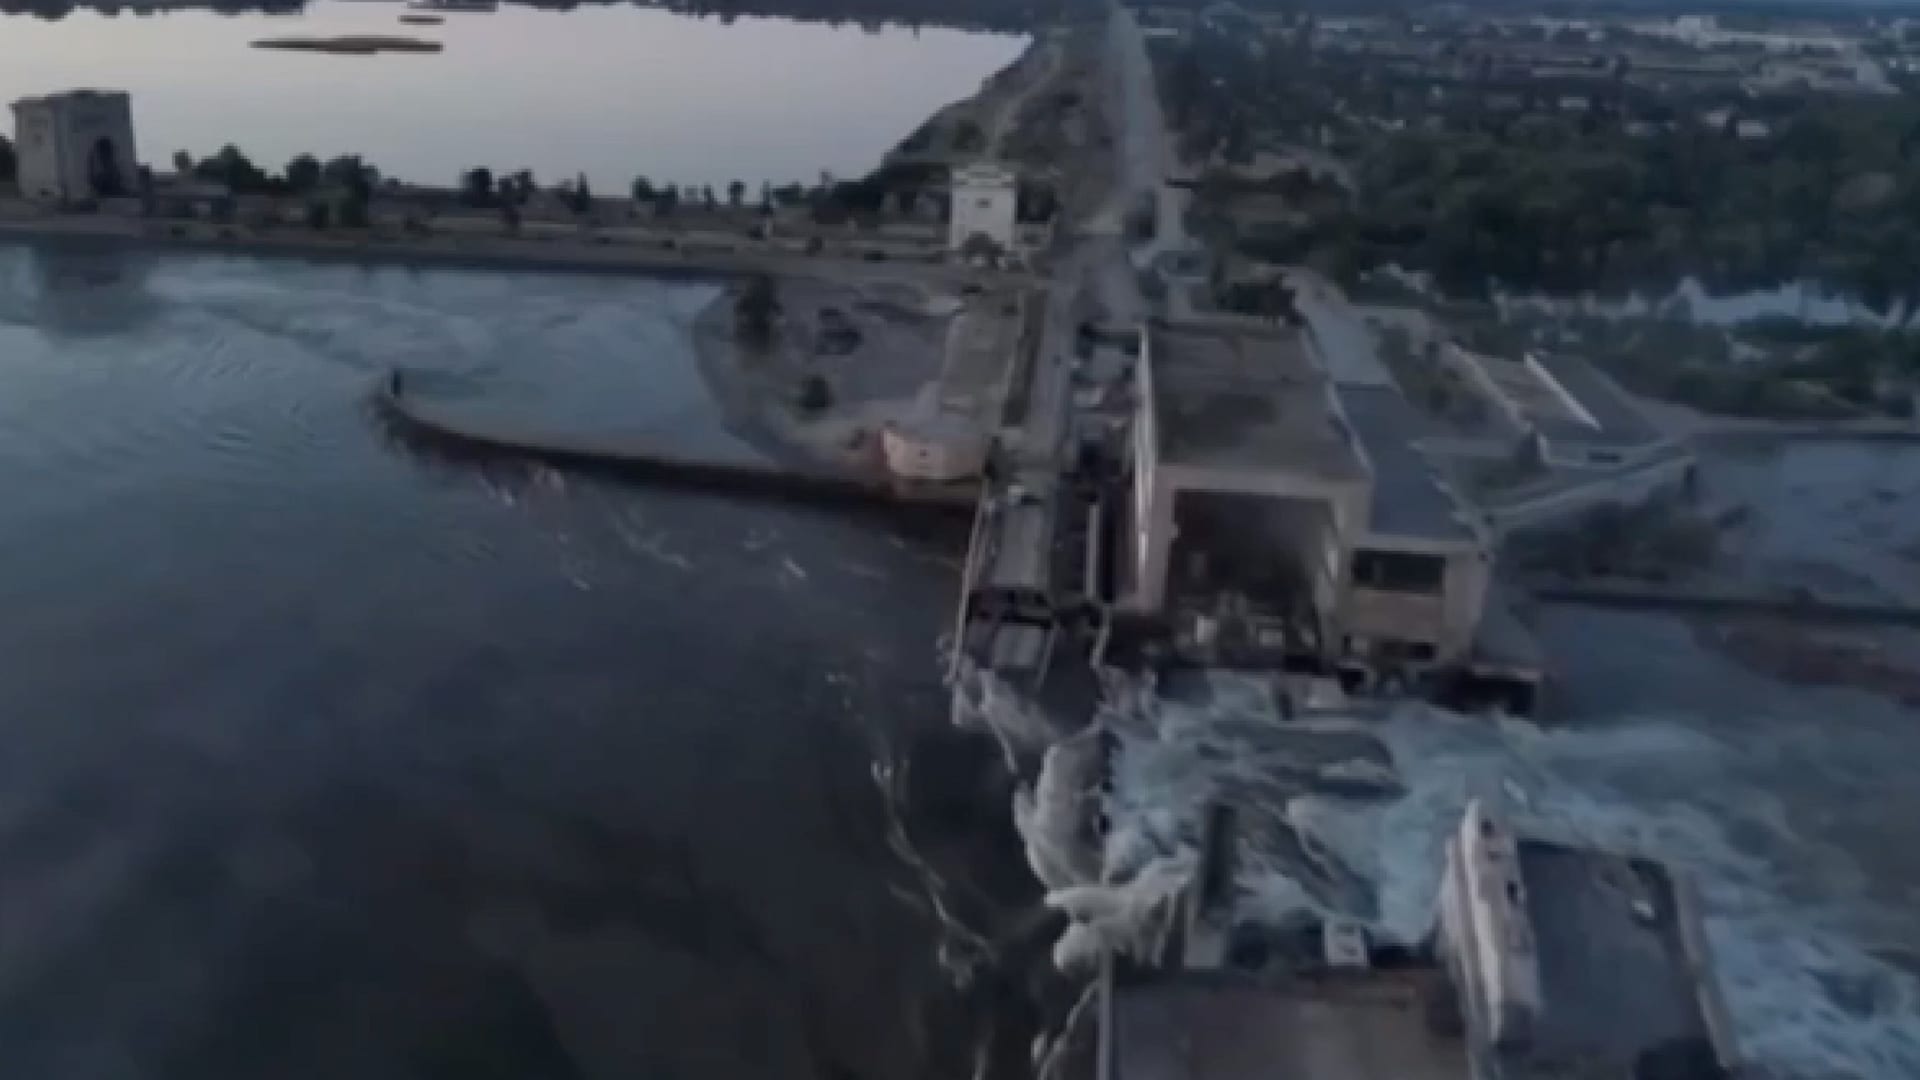 Destroyed dam in Ukraine unleashes floods, endangering thousands: Here’s what we know so far